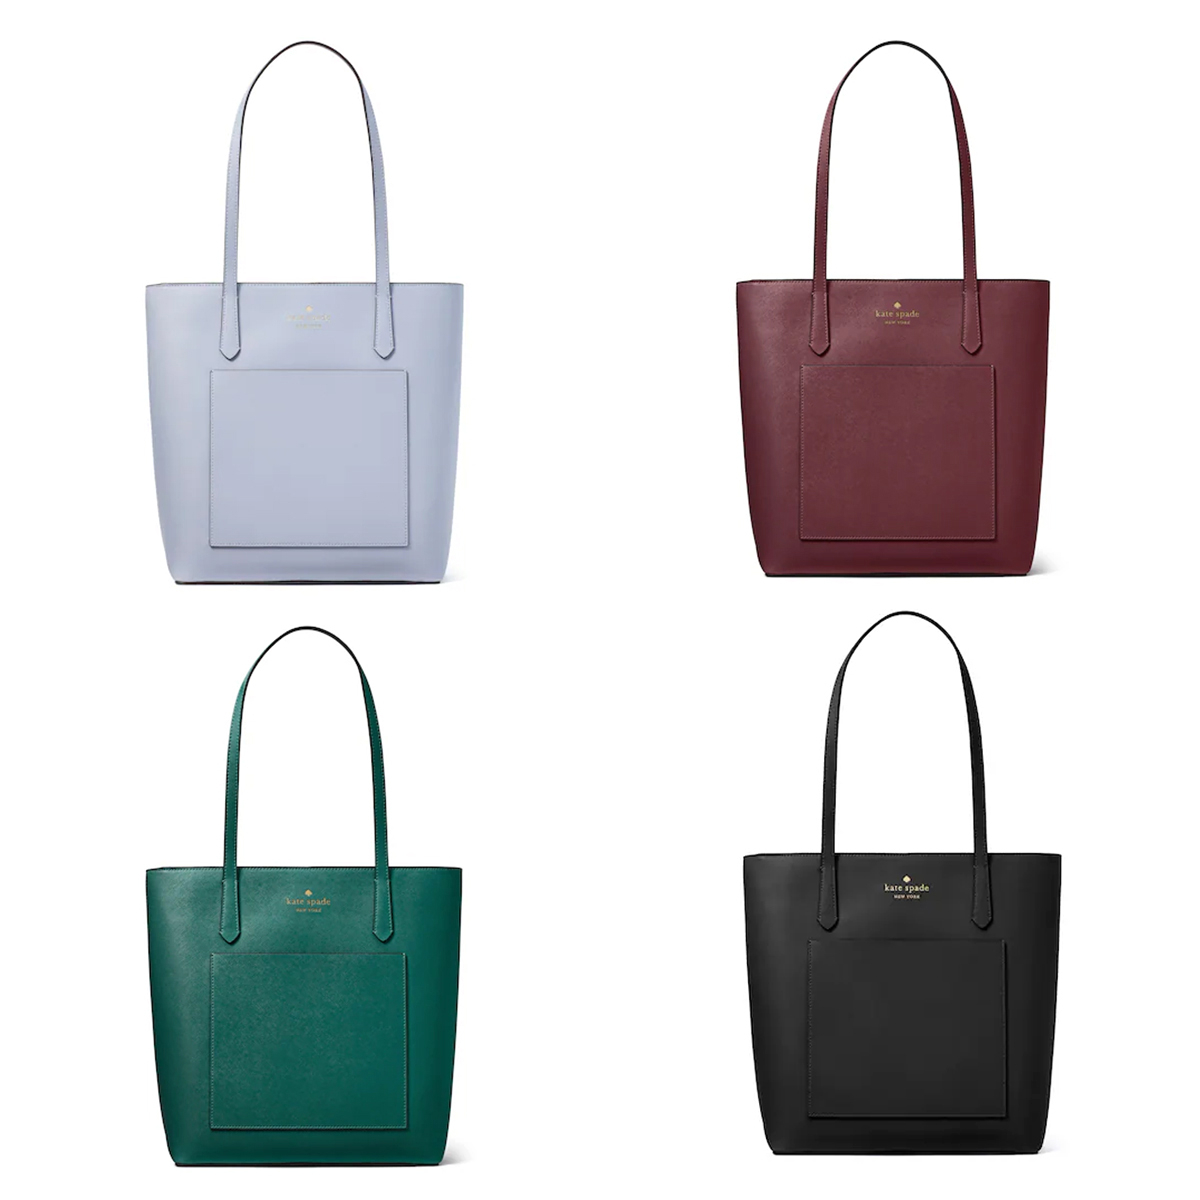 Kate Spade 24-Hour Flash Deal: Get This $360 Tote Bag for Just $75